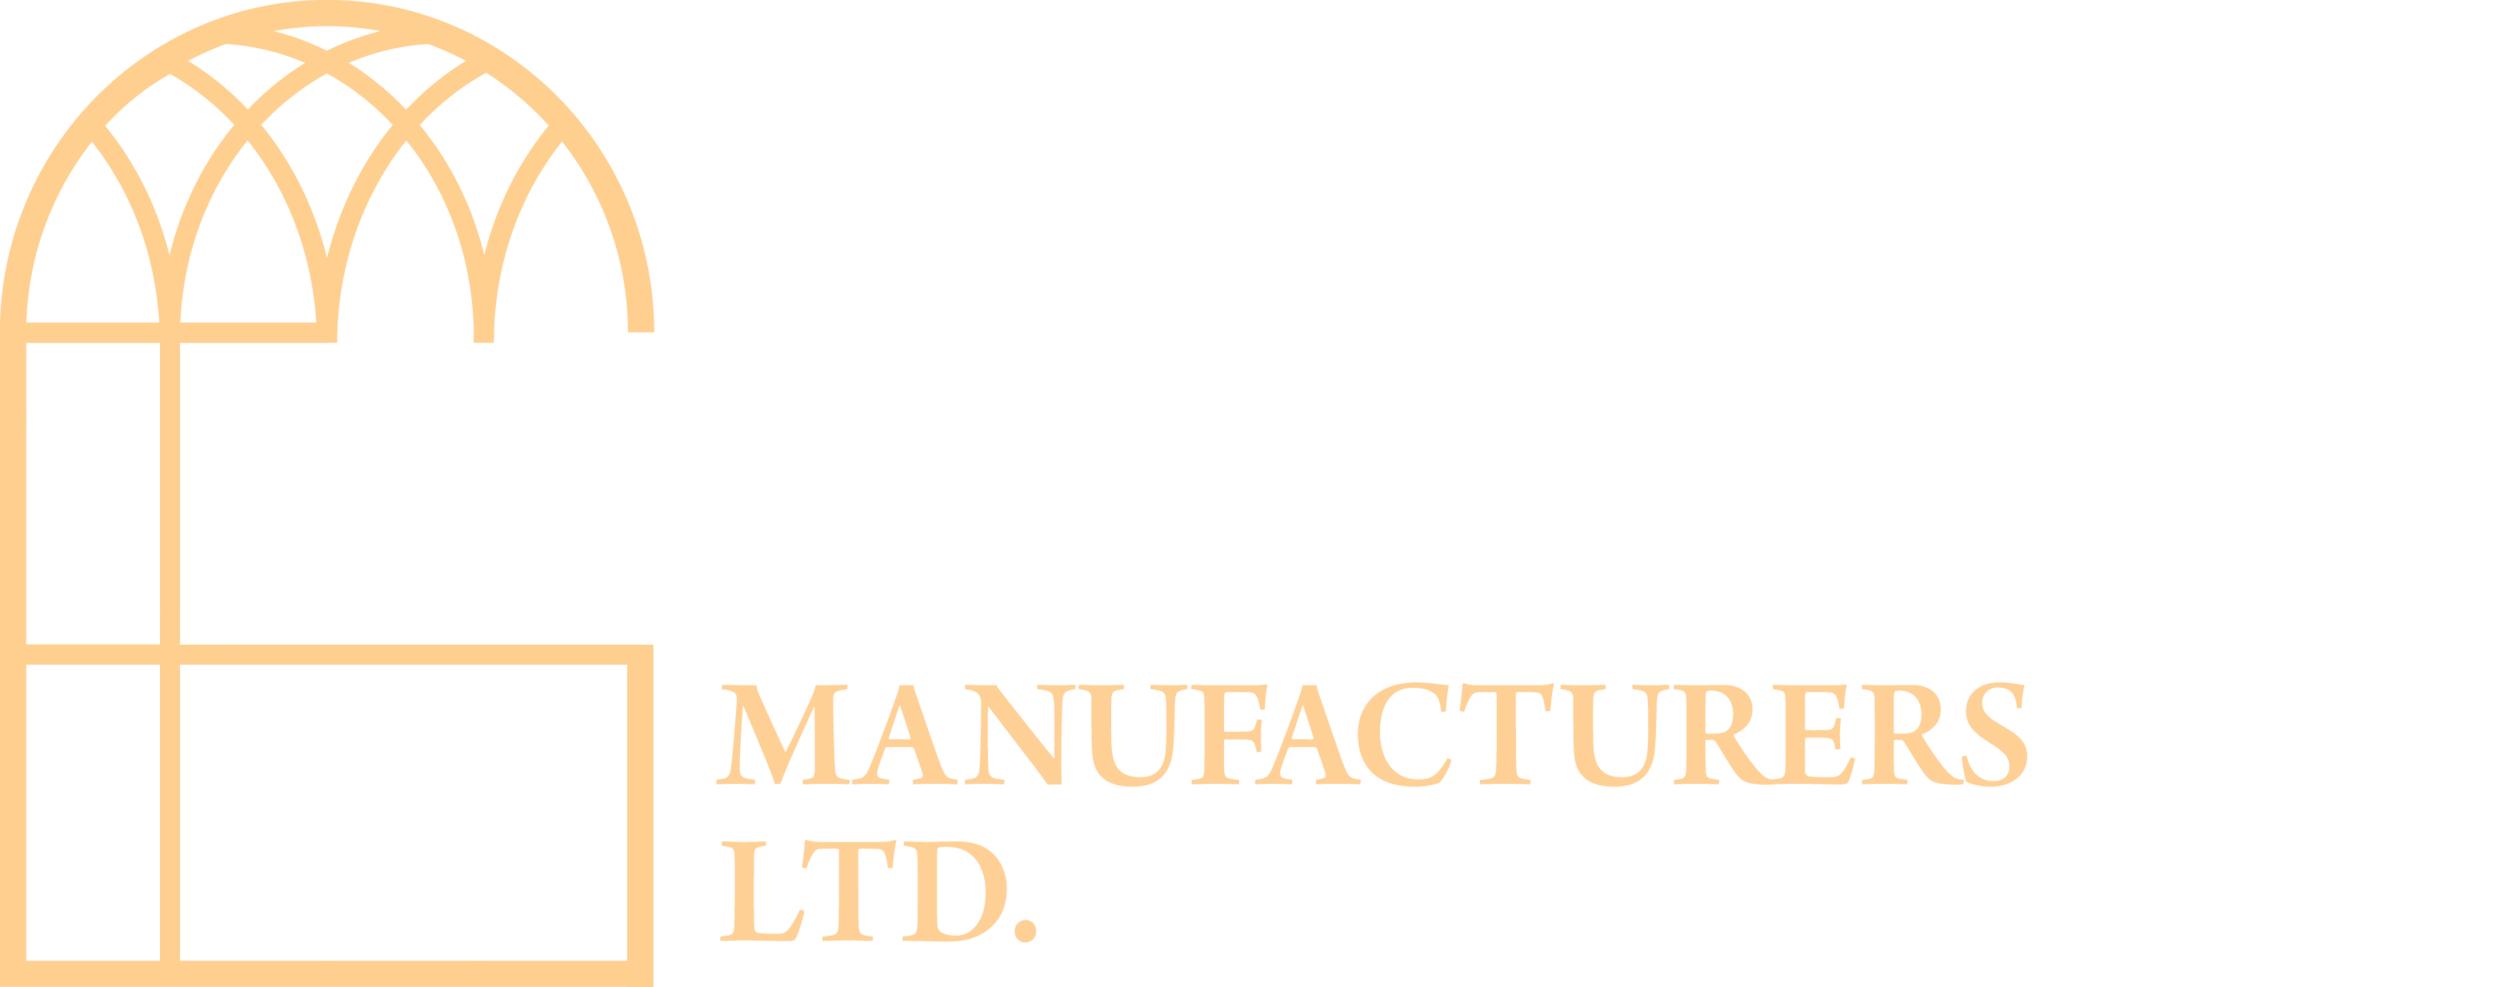 BROOKS JOINERY